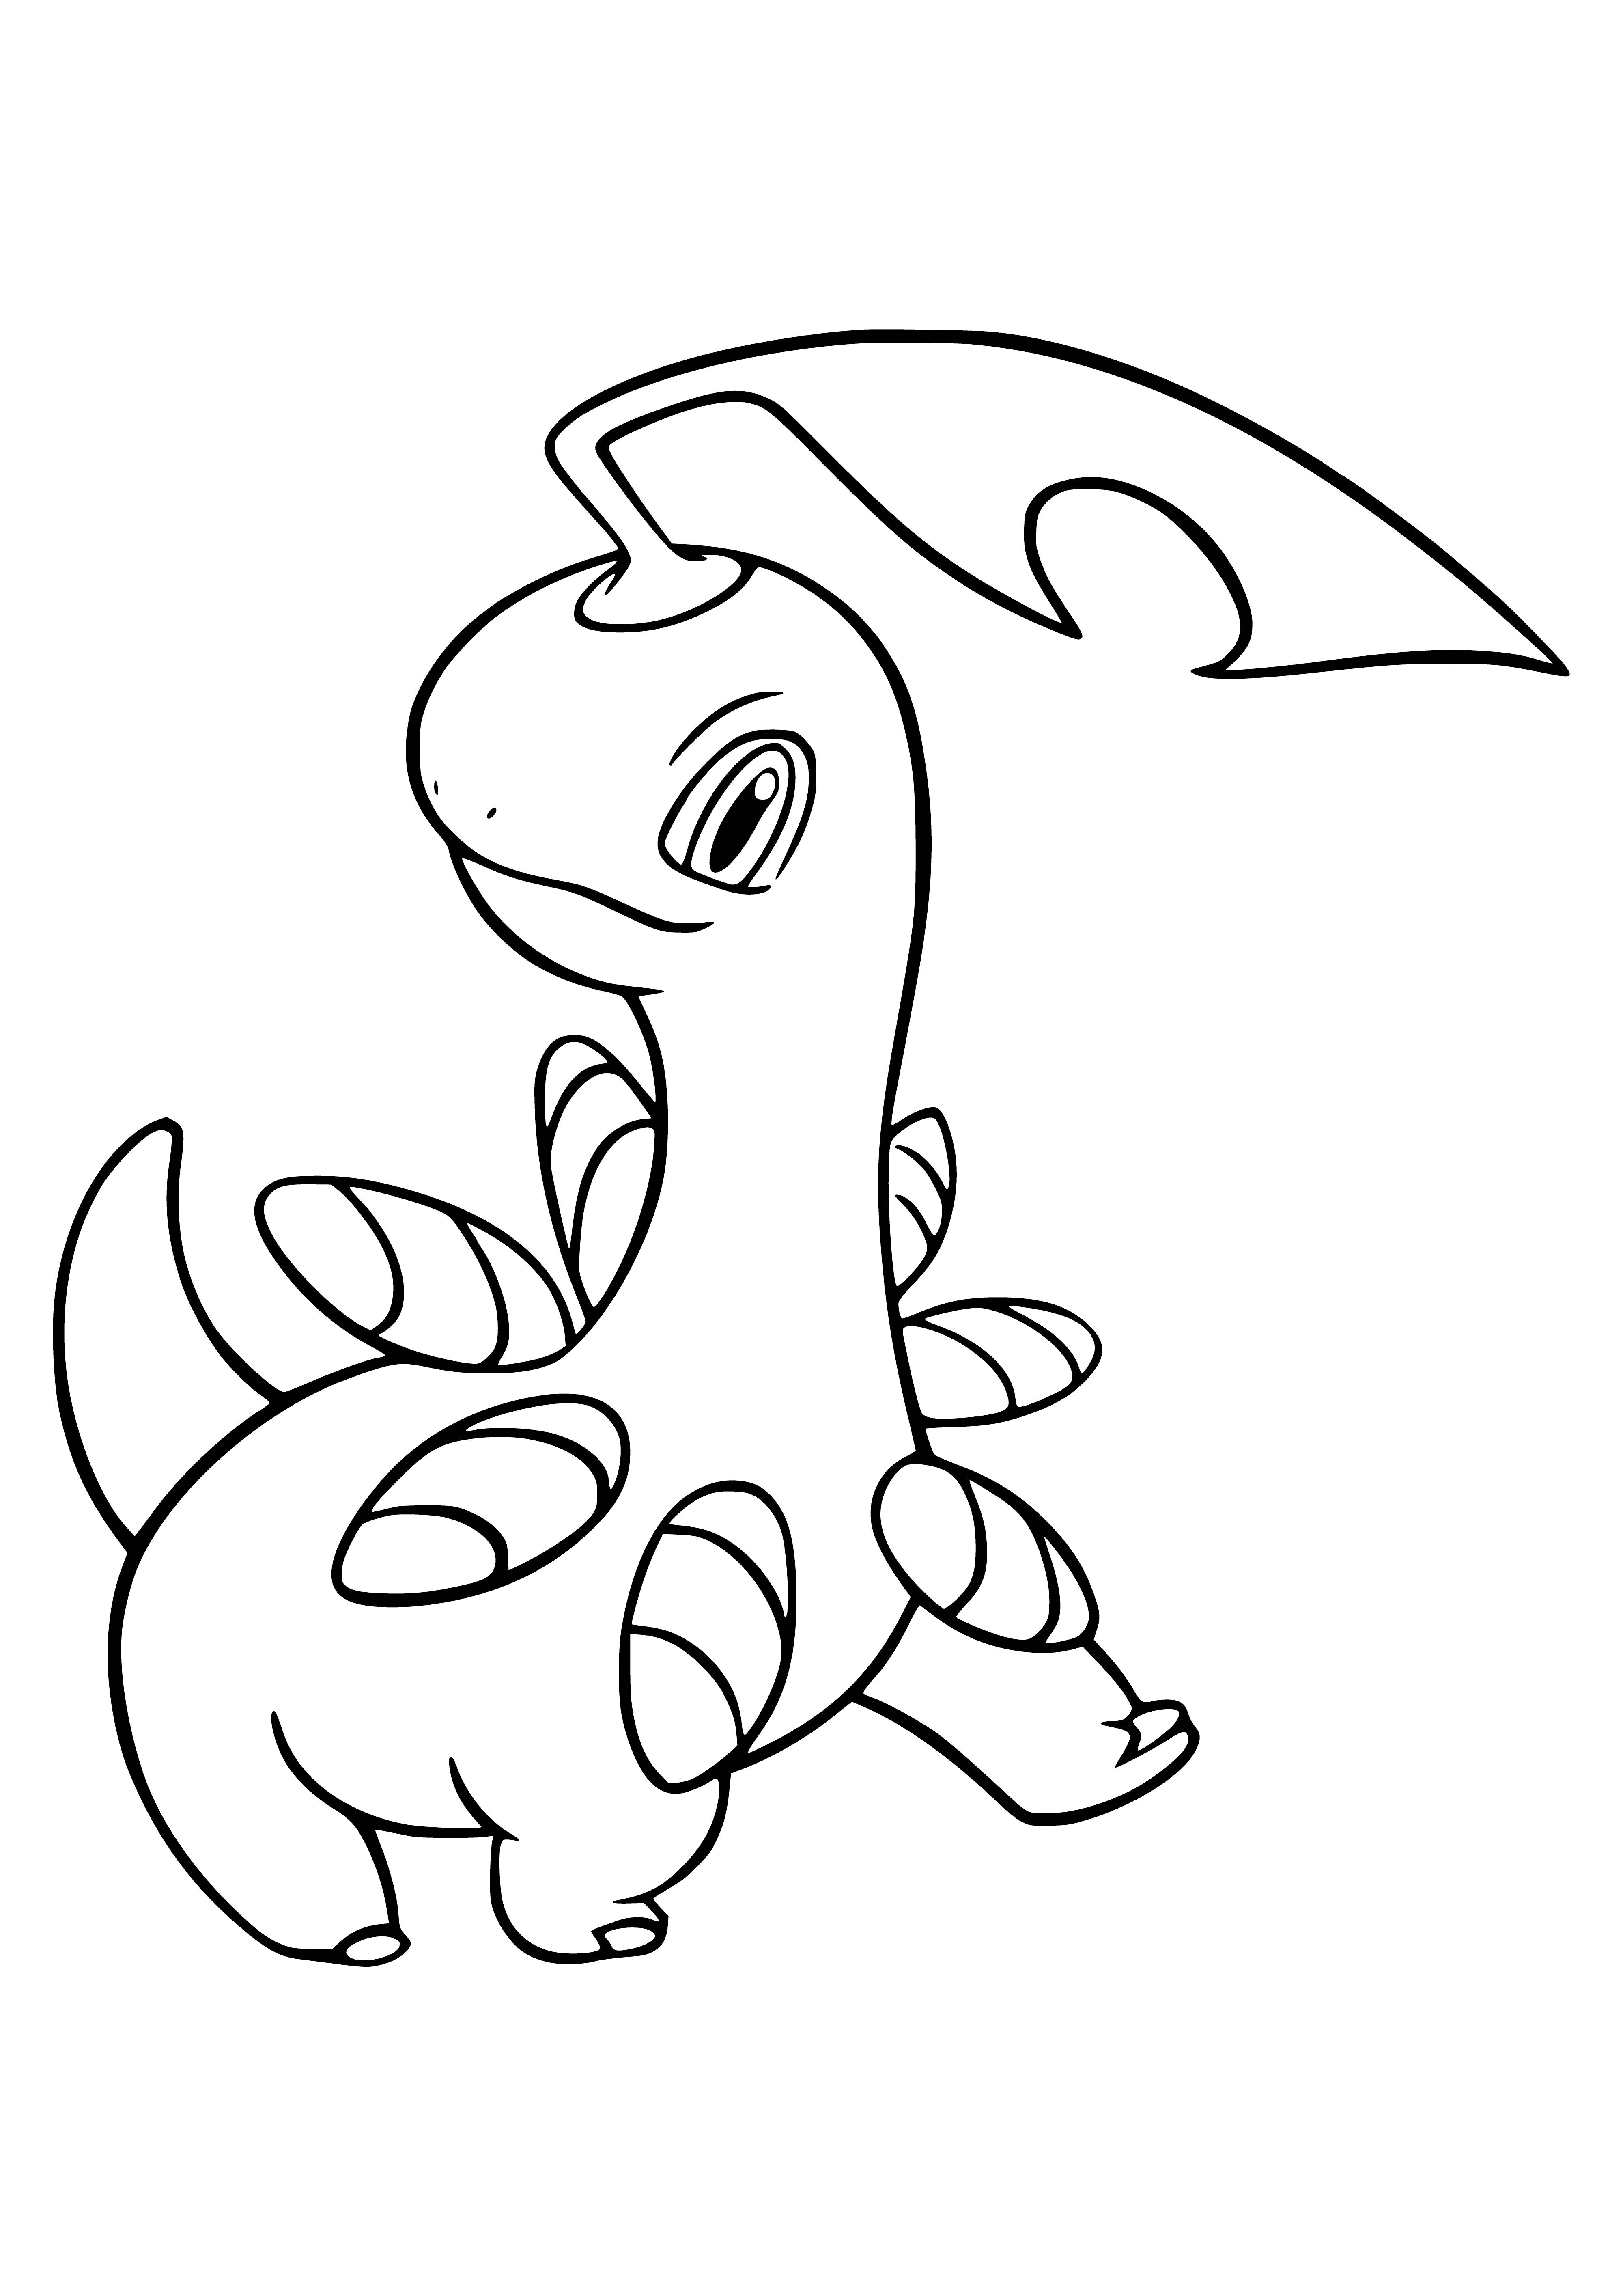 coloring page: Bayleef is a medium-sized Pokemon with pale yellow skin, big eyes, short snout, long thin neck, small leaf on head, green body, thin legs with 3-clawed feet, & long green tail.